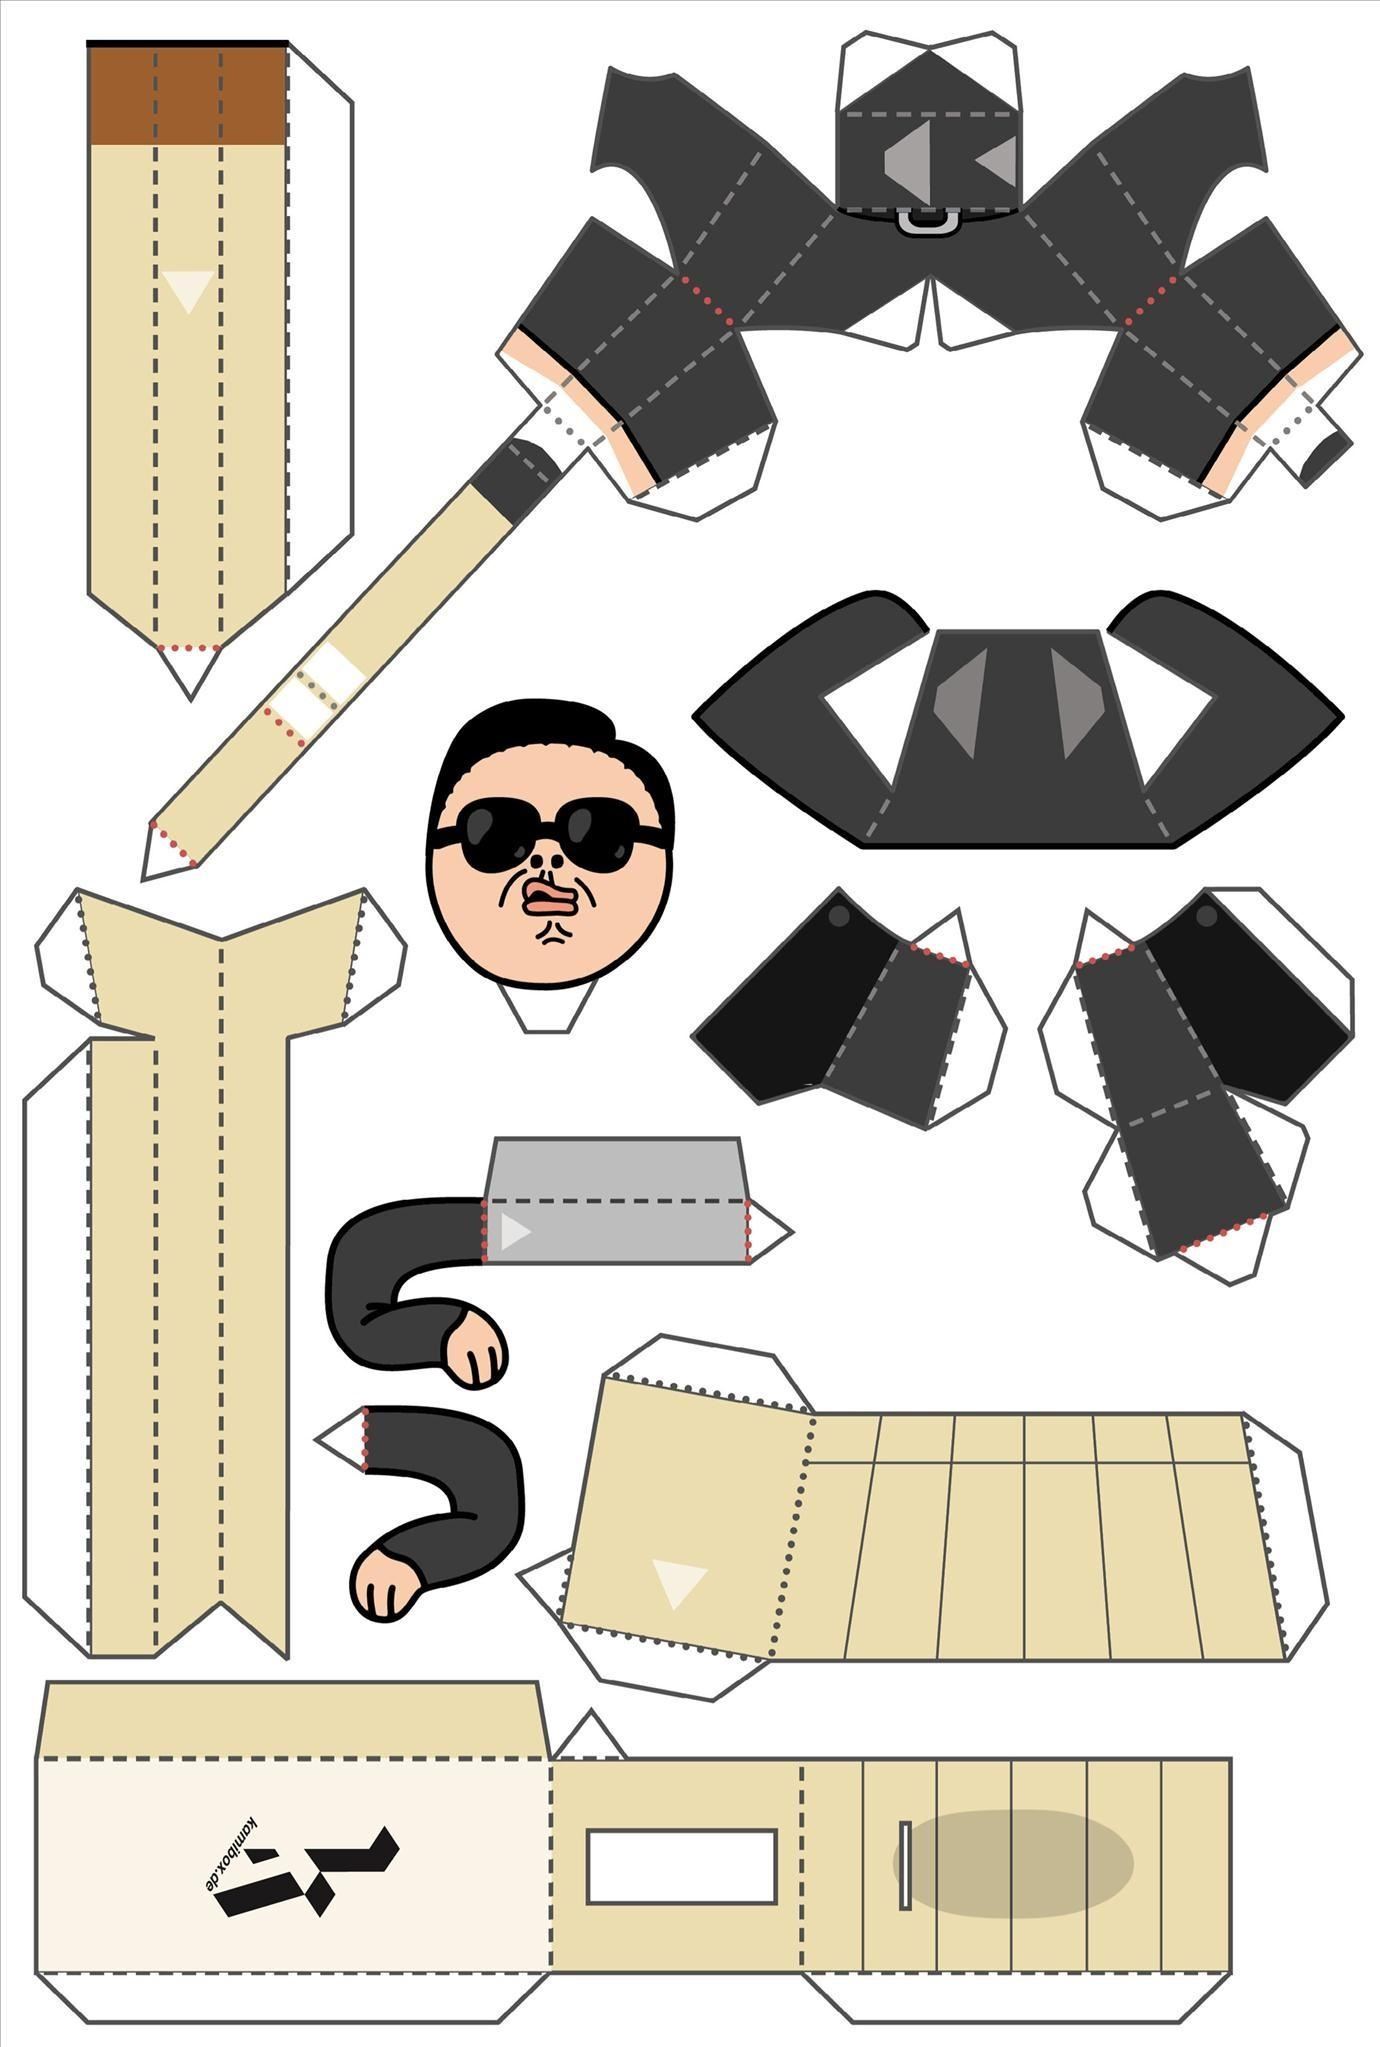 Make PSY Dance Whenever You Want with This DIY Gangnam Style Papercraft Machine